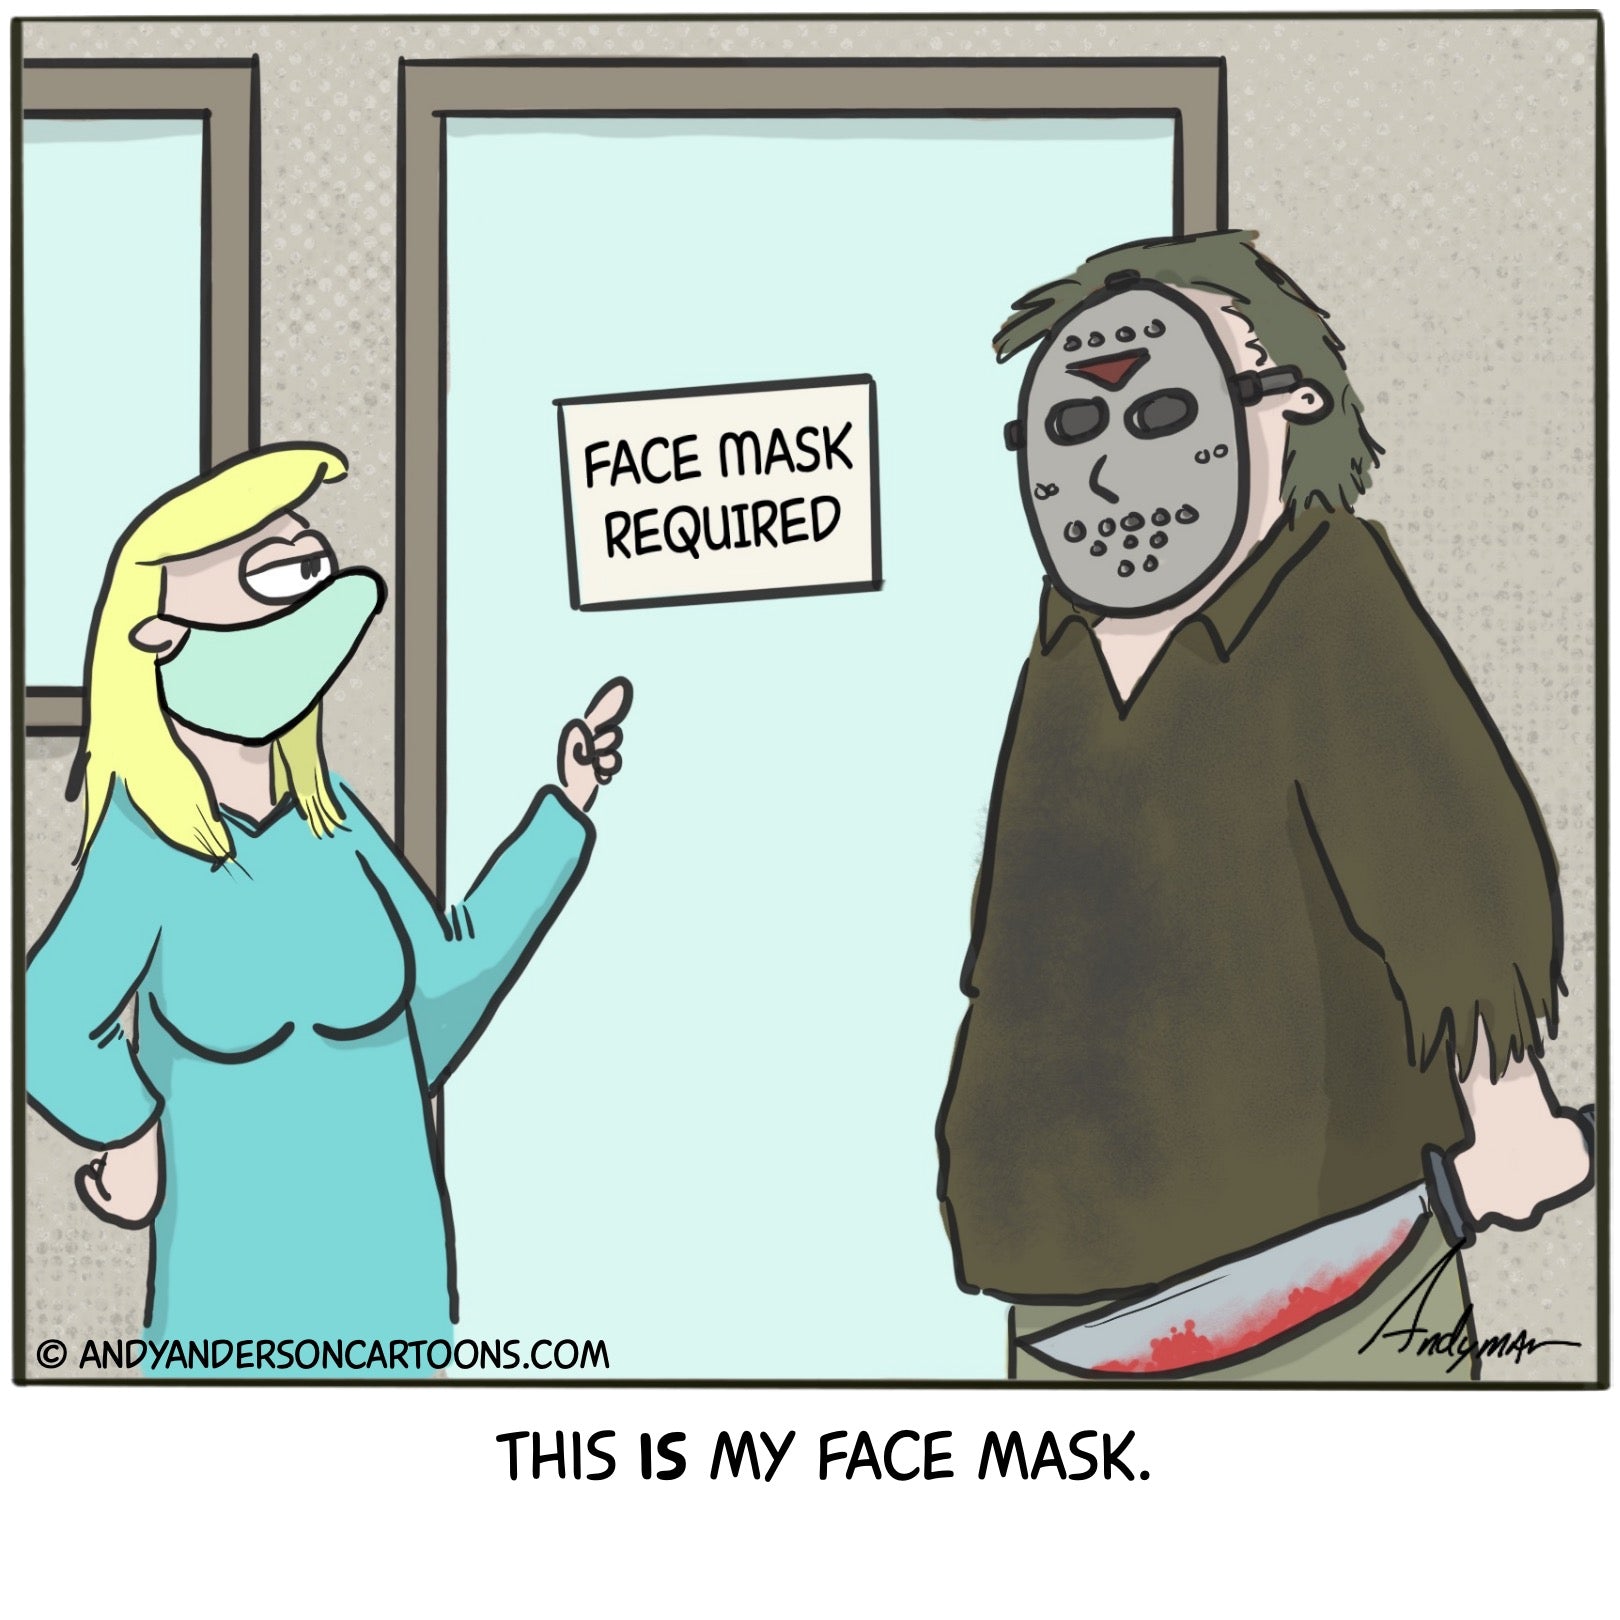 Cartoon about Jason from Friday 13th wearing a face mask